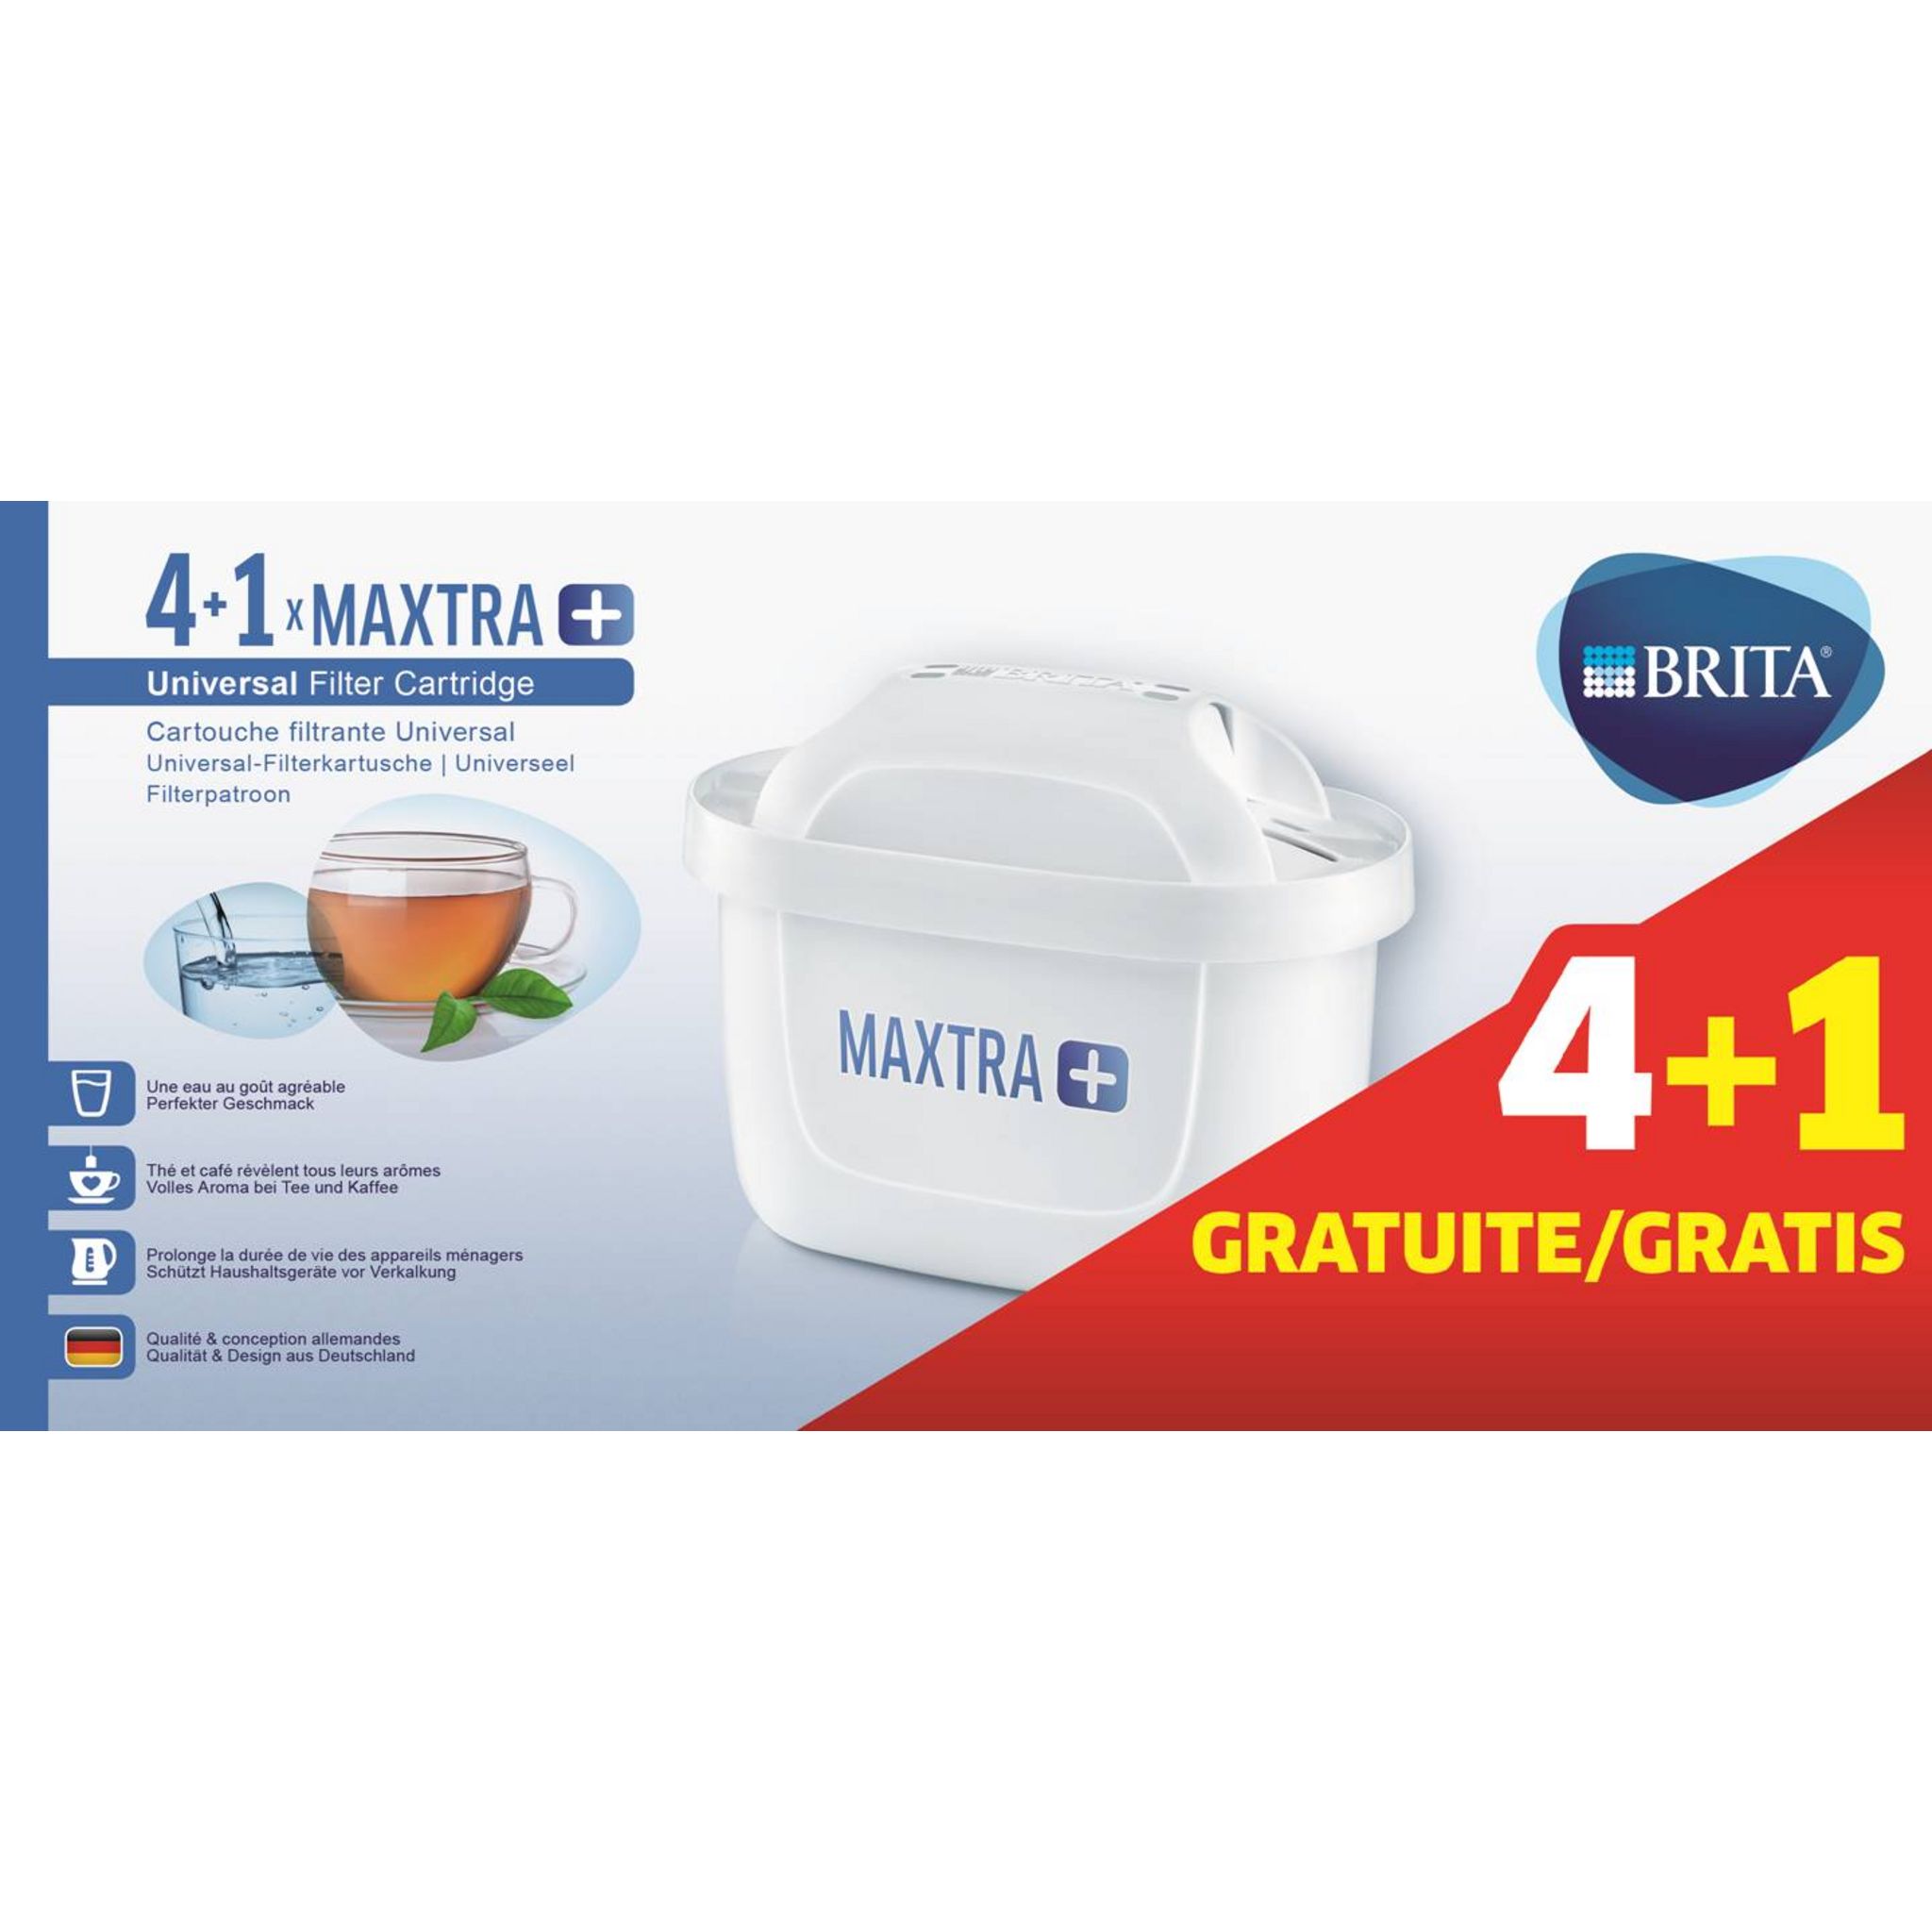 Maxtra Pro All-in-1 - Cartouches Filtrantes - Pack 5+1 gratuite